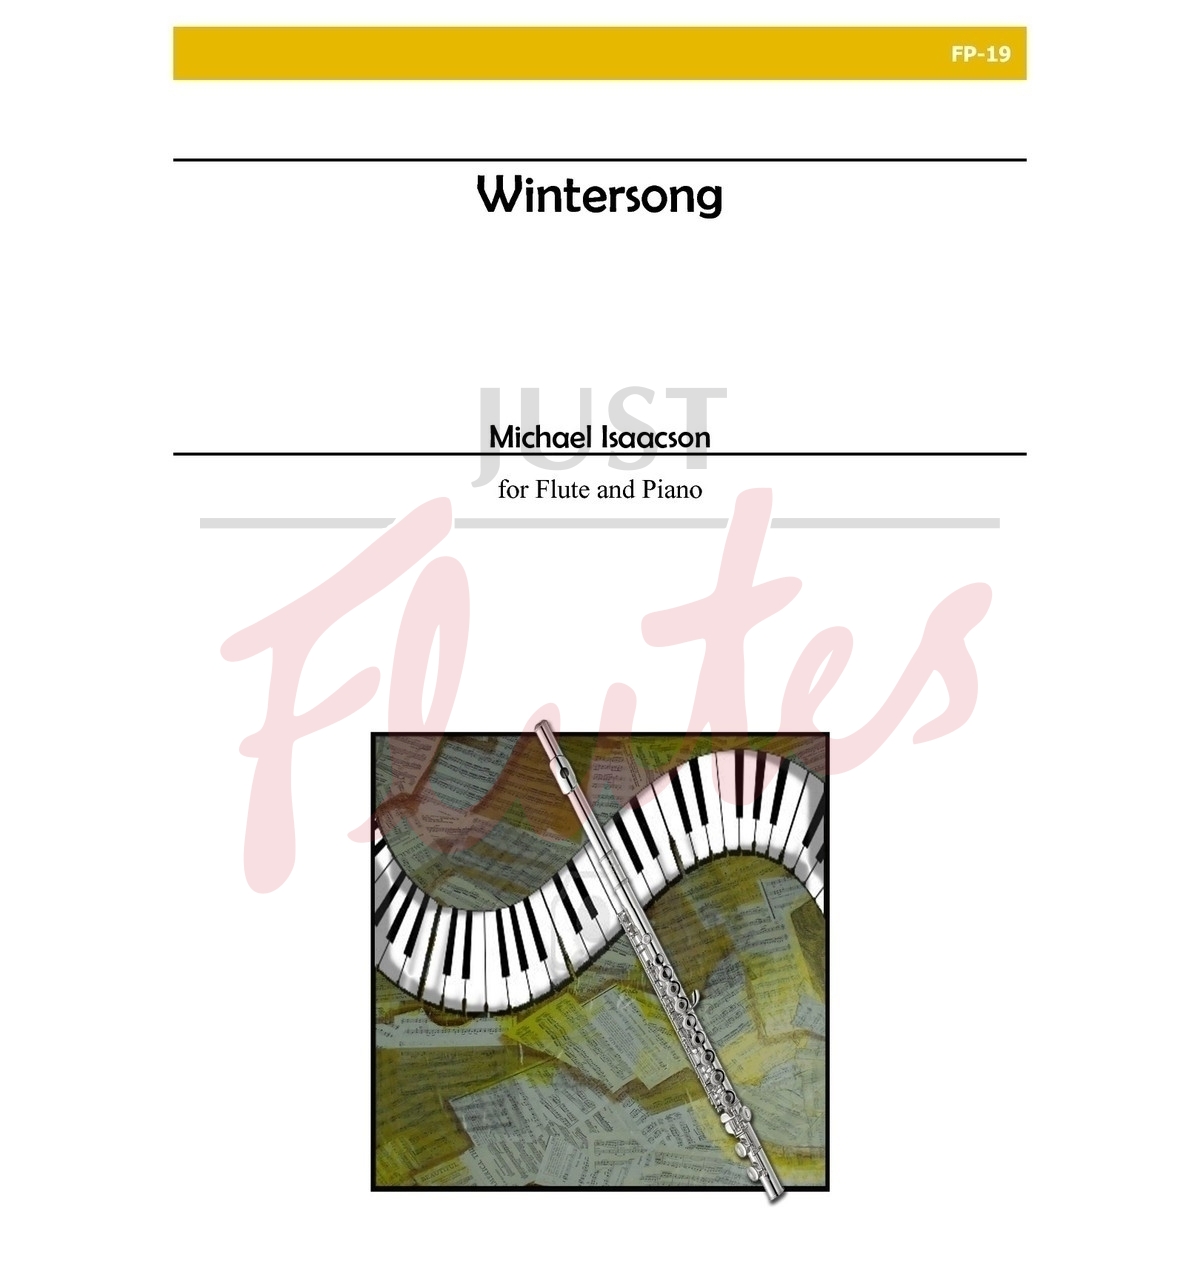 Wintersong for Flute and Piano